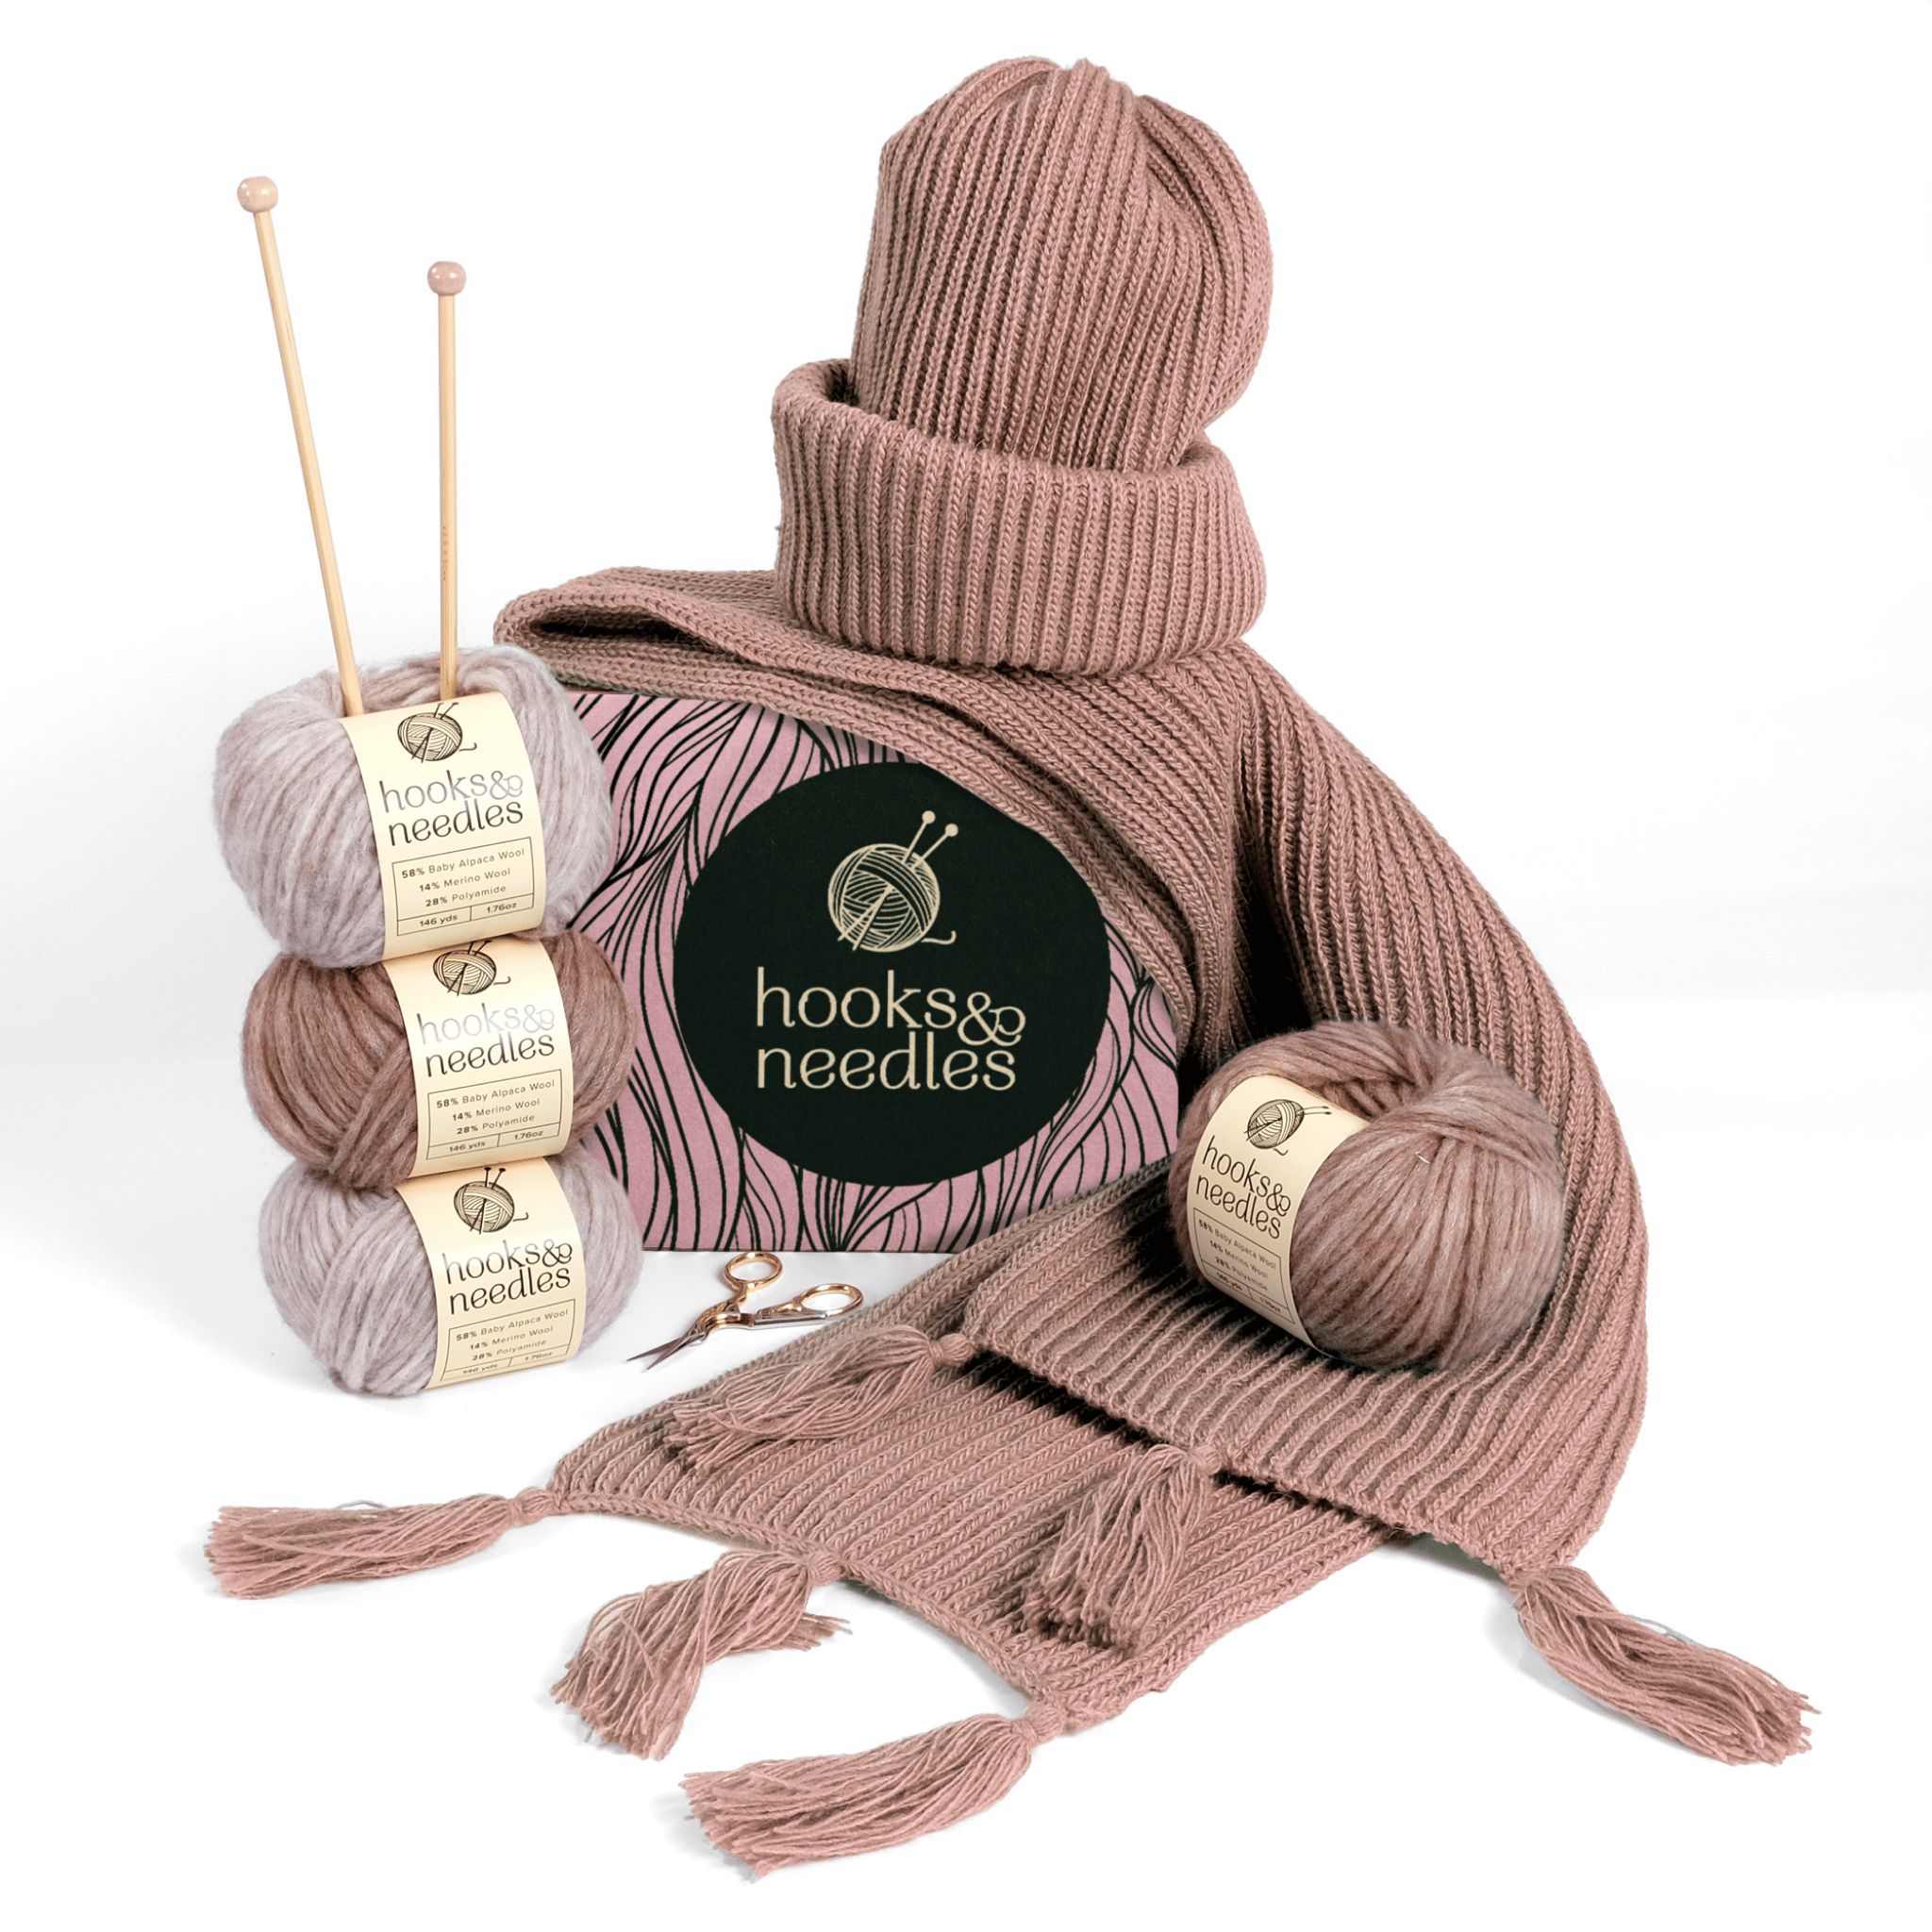 A display of [6-Month-Prepaid] Hooks & Needles Subscription Box #26 items including pink yarn, knitting needles, and a finished scarf and hat, neatly arranged on a white background.